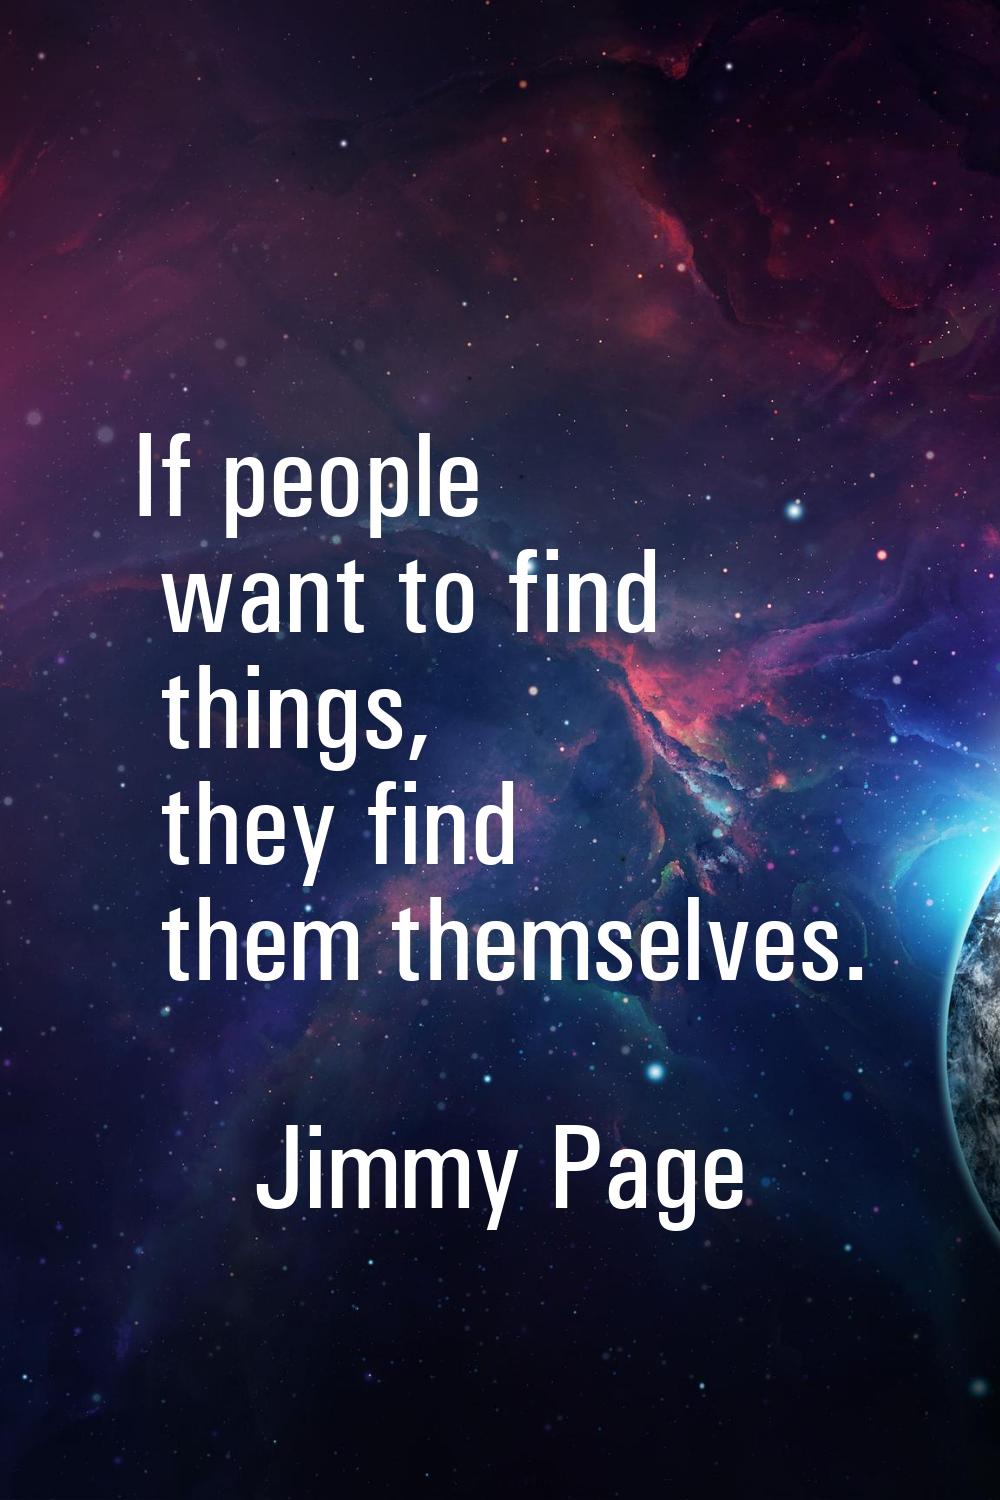 If people want to find things, they find them themselves.